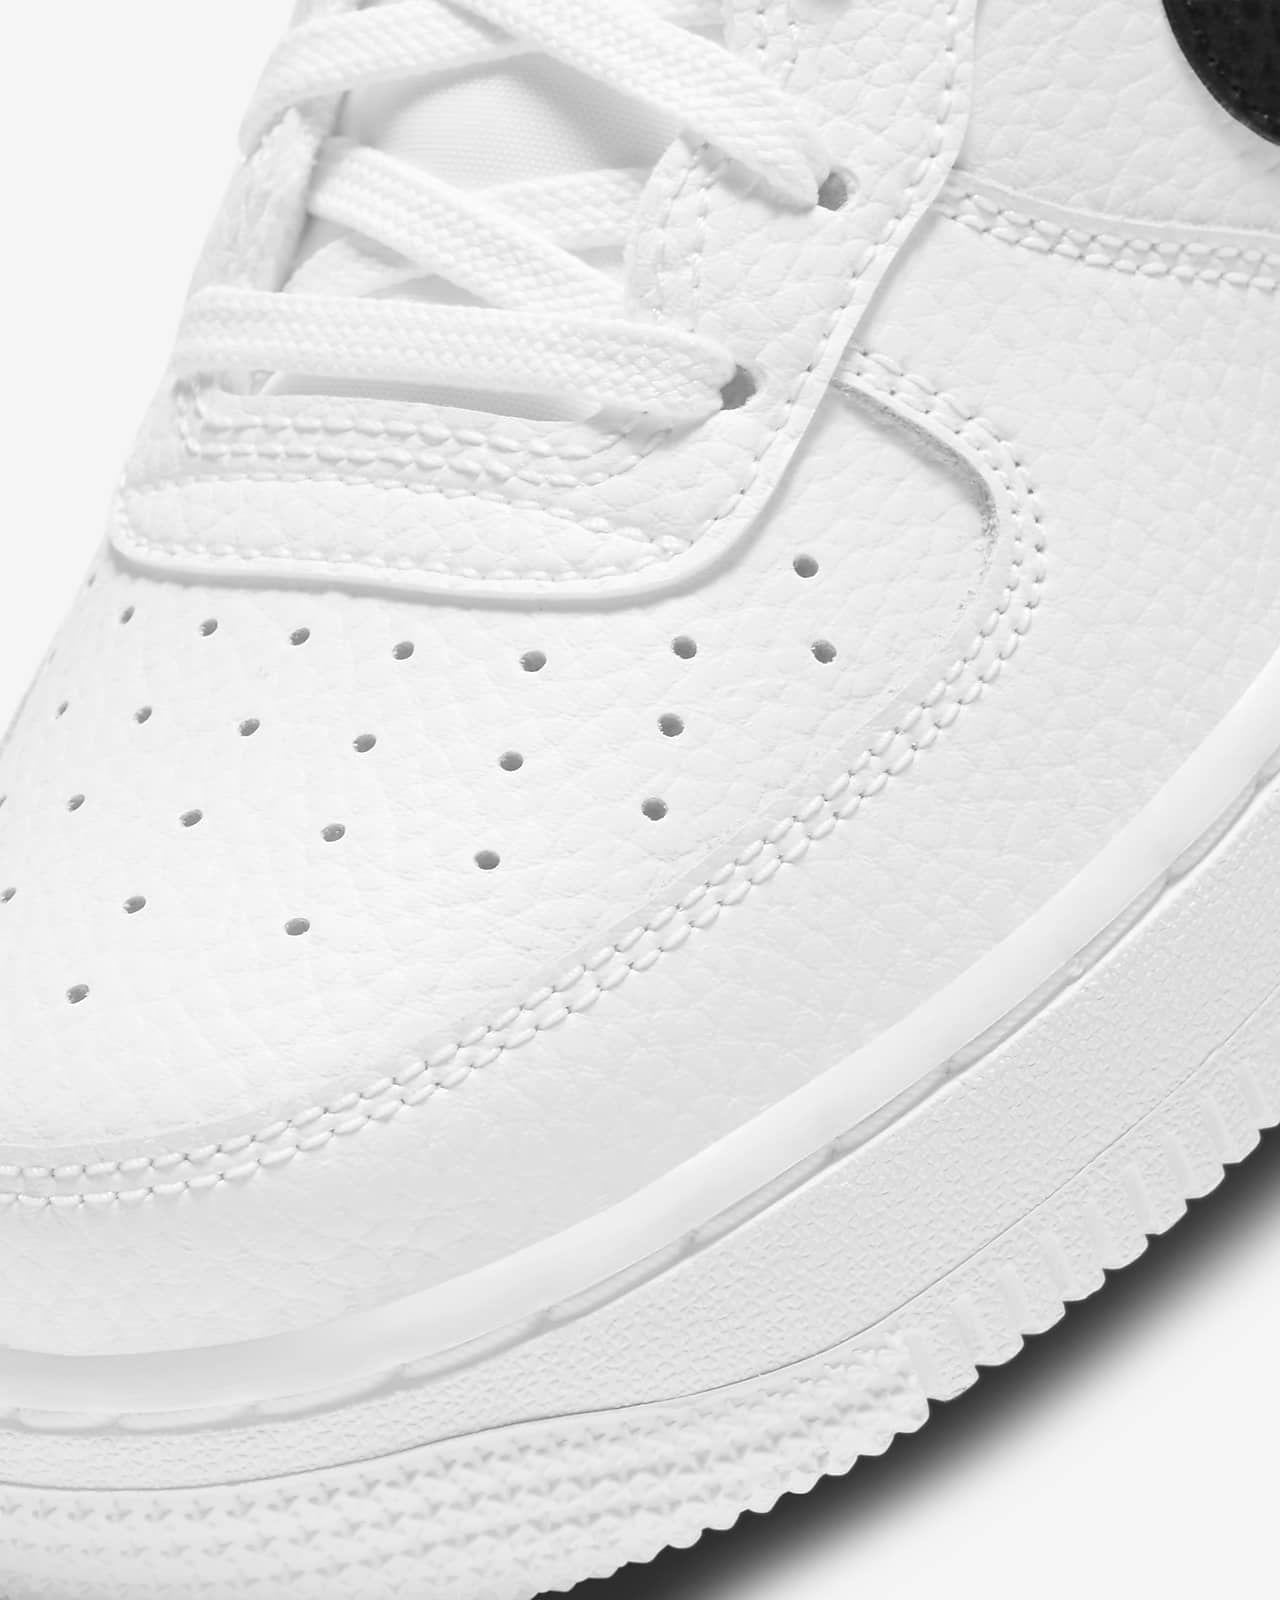 white nike shoes air force 1